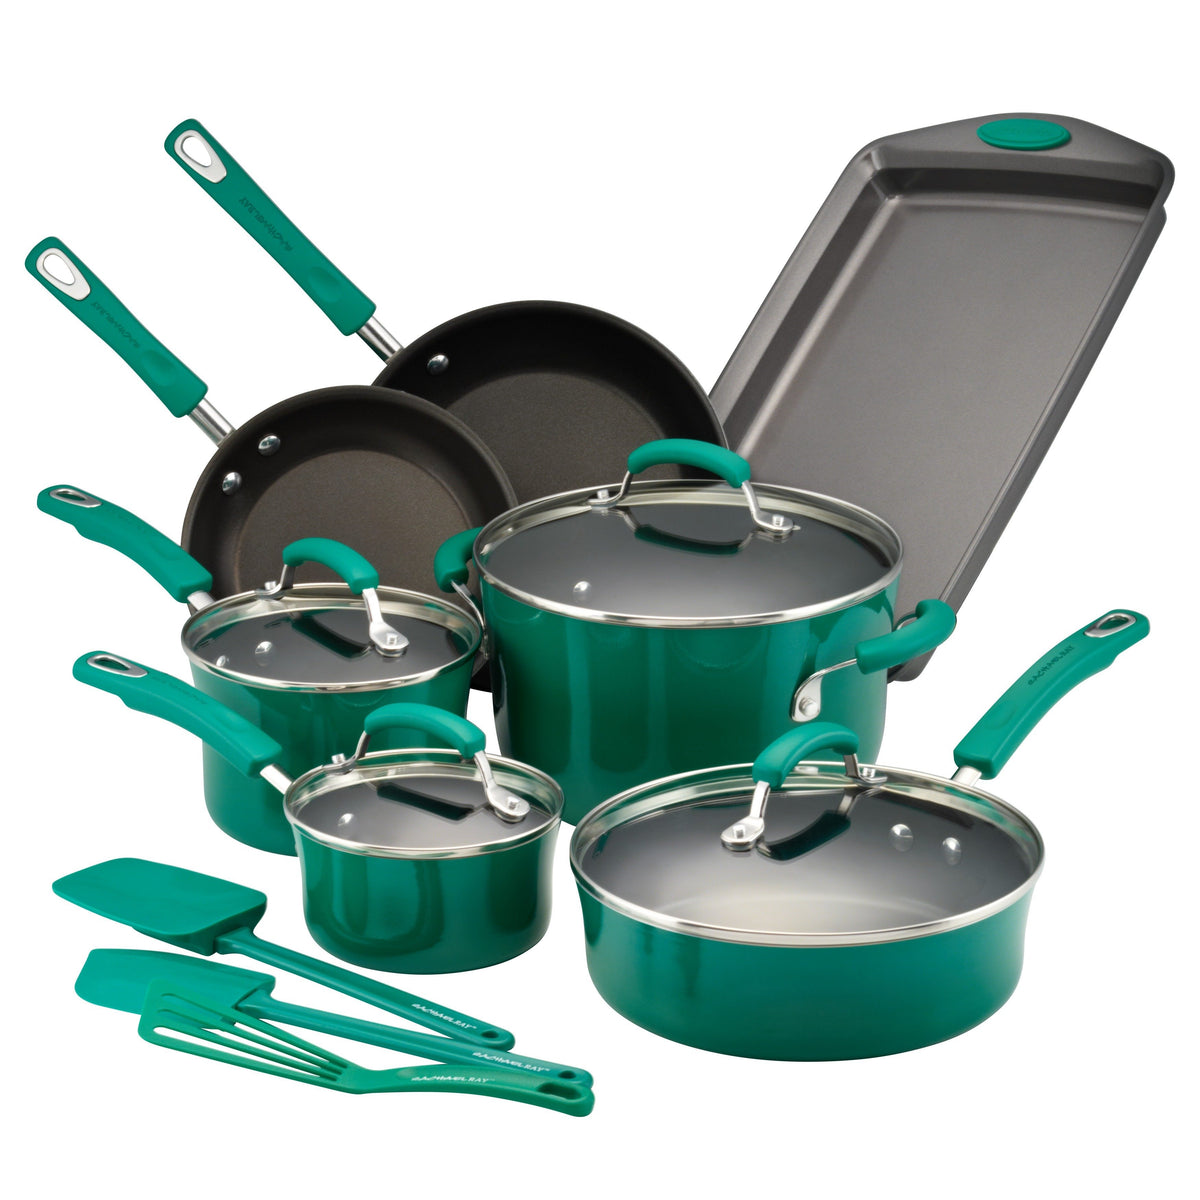 What Is Porcelain Enamel Cookware?